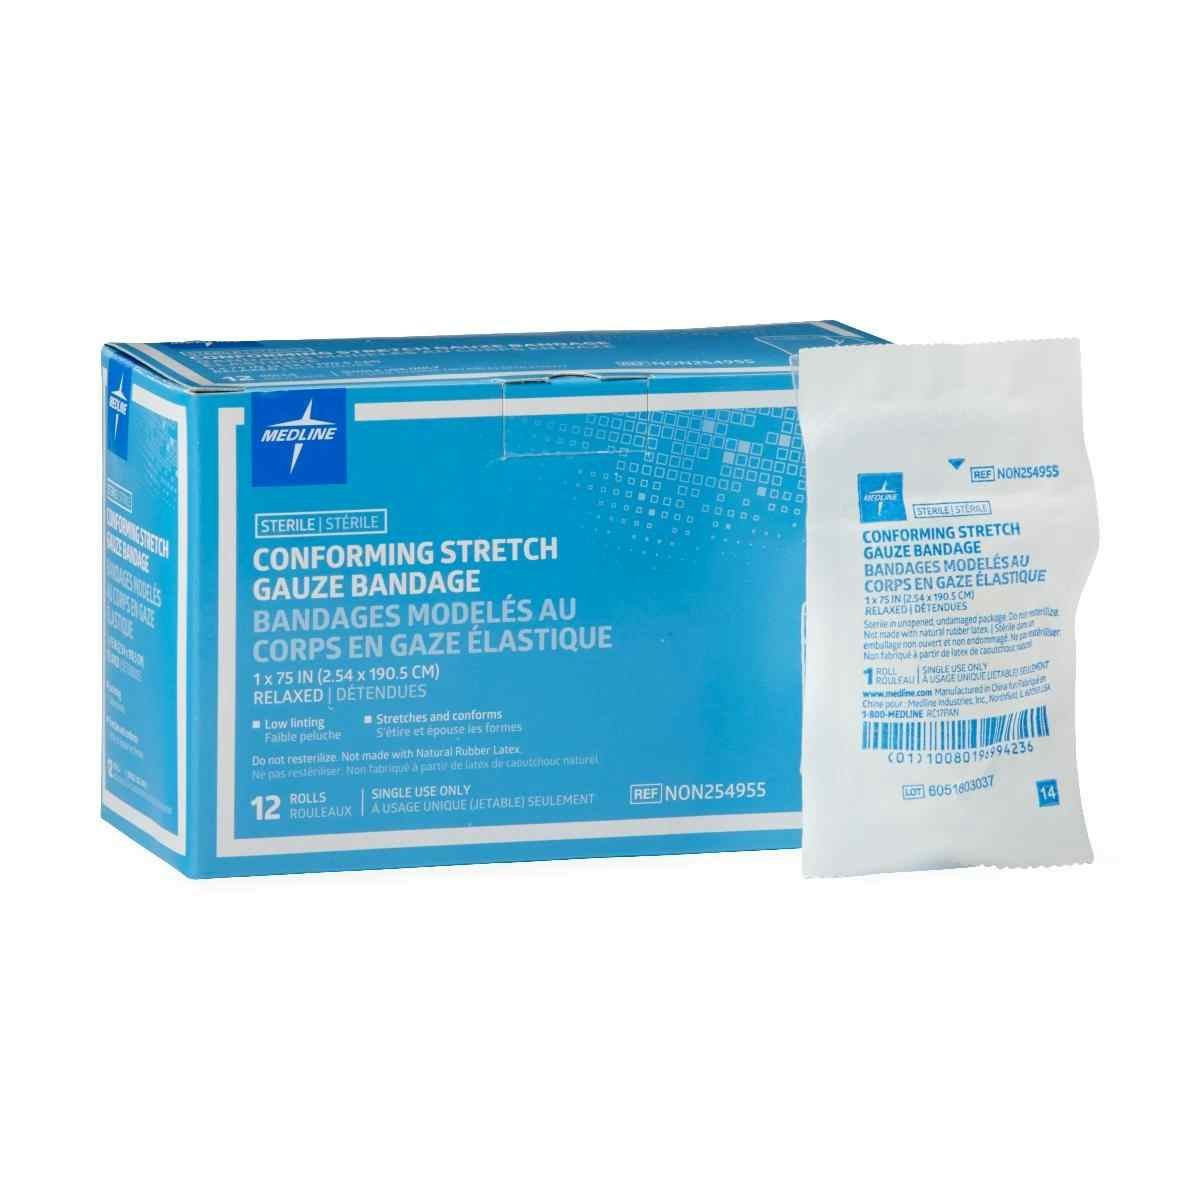 Medline Conforming Stretch Gauze Bandages, Heavy Weight, NON25496, 2" X 75" - Case of 96